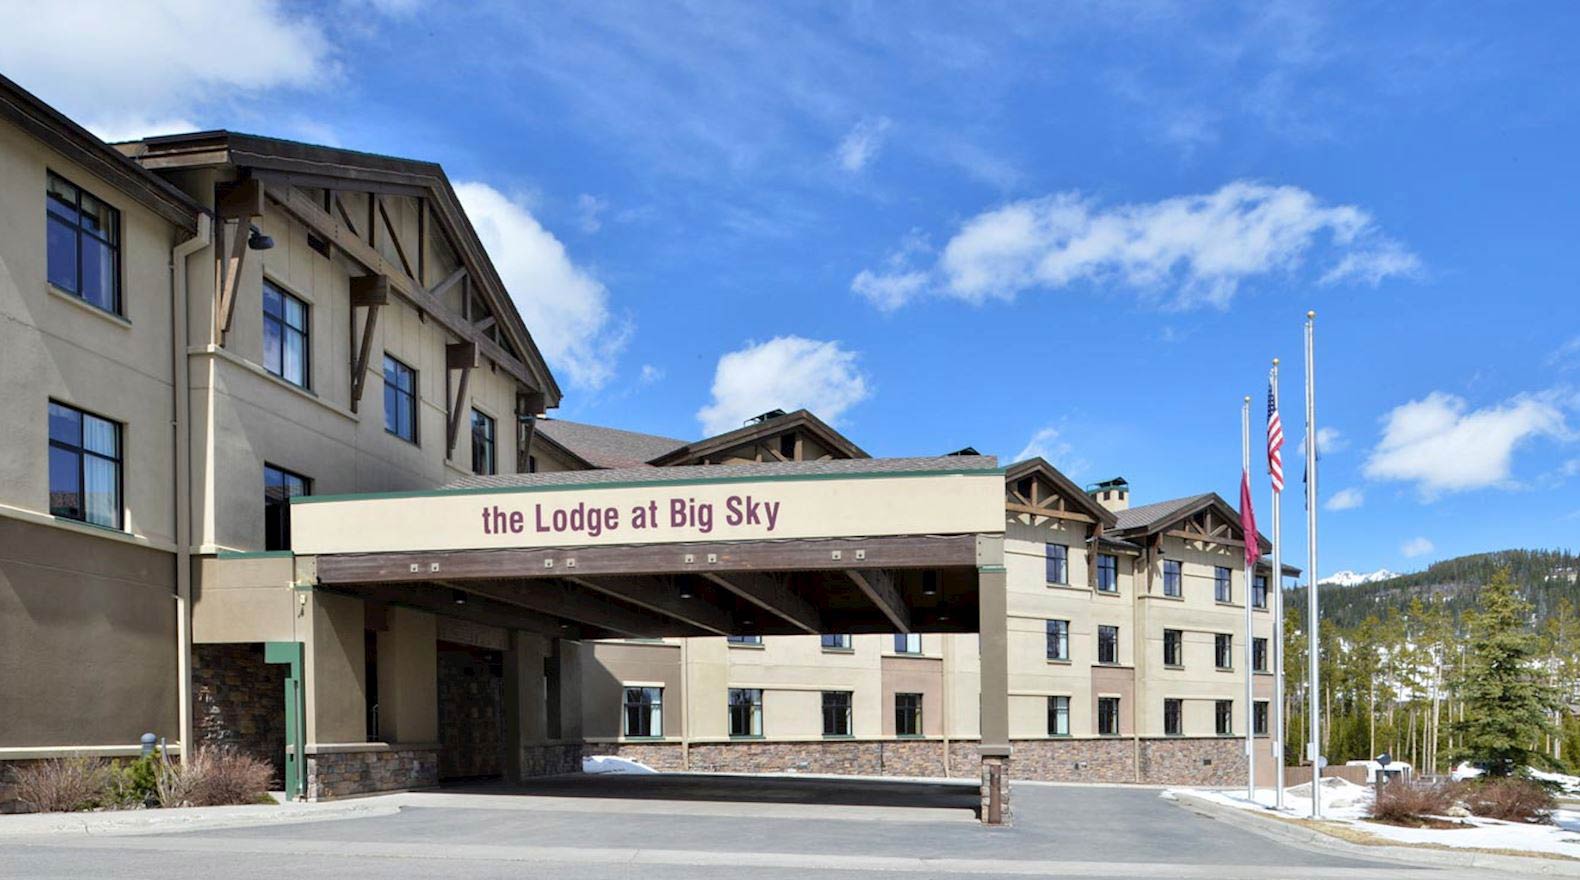 https://www.lodgeatbigsky.com/resourcefiles/homeimages/the-lodge-at-big-sky-montana-1-top.jpg?version=10312023145558